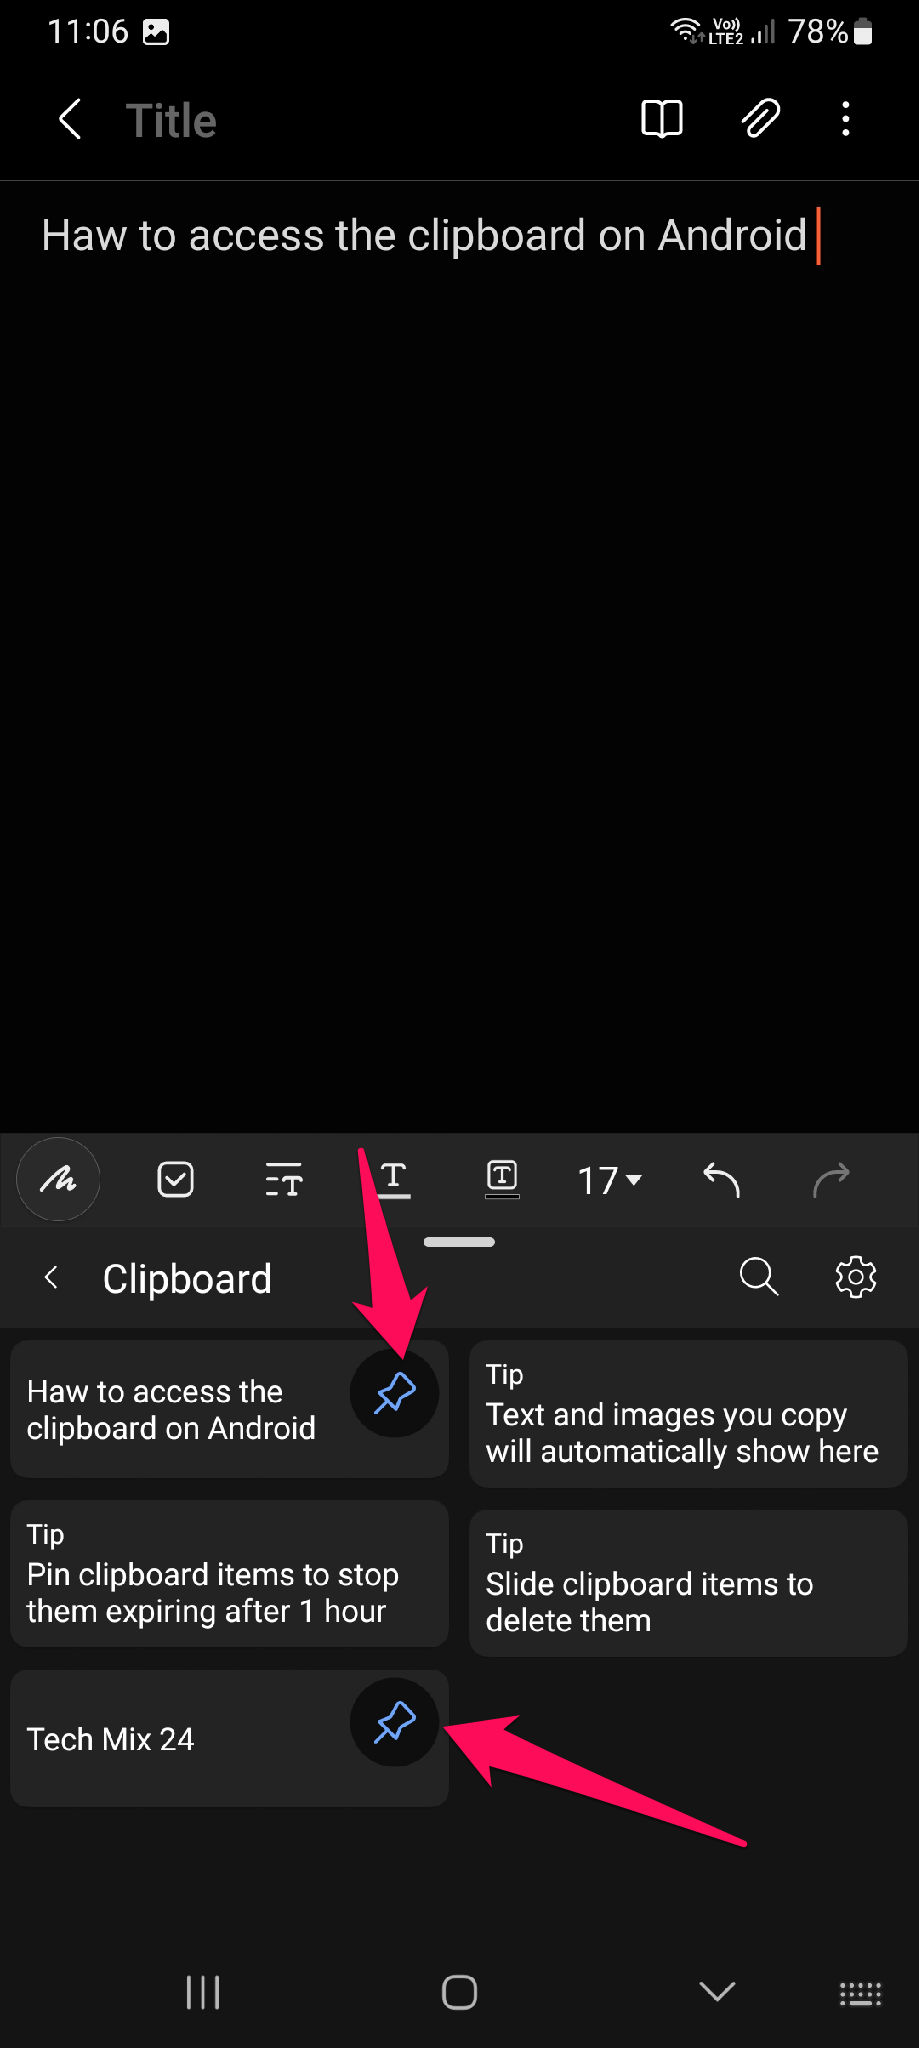 Clipboard How to access the clipboard on Android